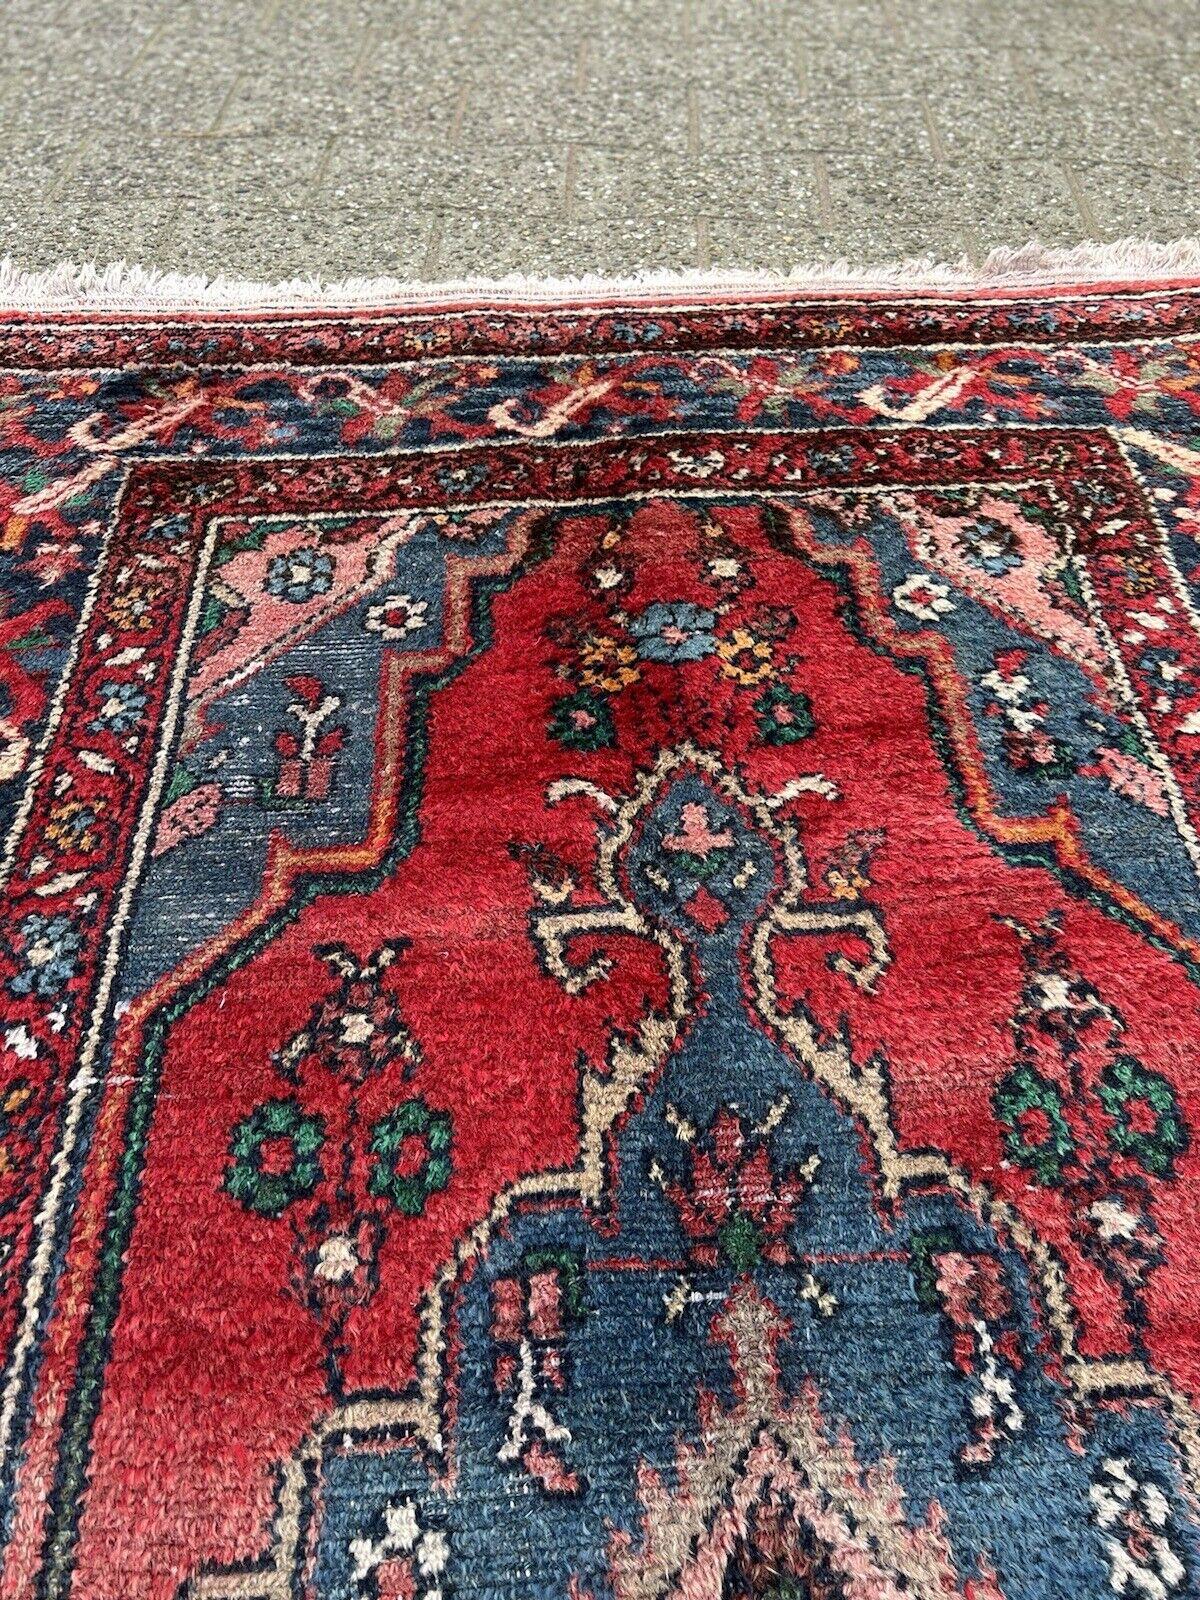 Step back in time with this Handmade Vintage Persian Style Lilihan Rug. Originating from the 1970s, this rug measures 3.8’ x 7’ (117cm x 216cm) and is a stunning representation of Lilihan rug-making artistry.

The rug is in good condition, with some